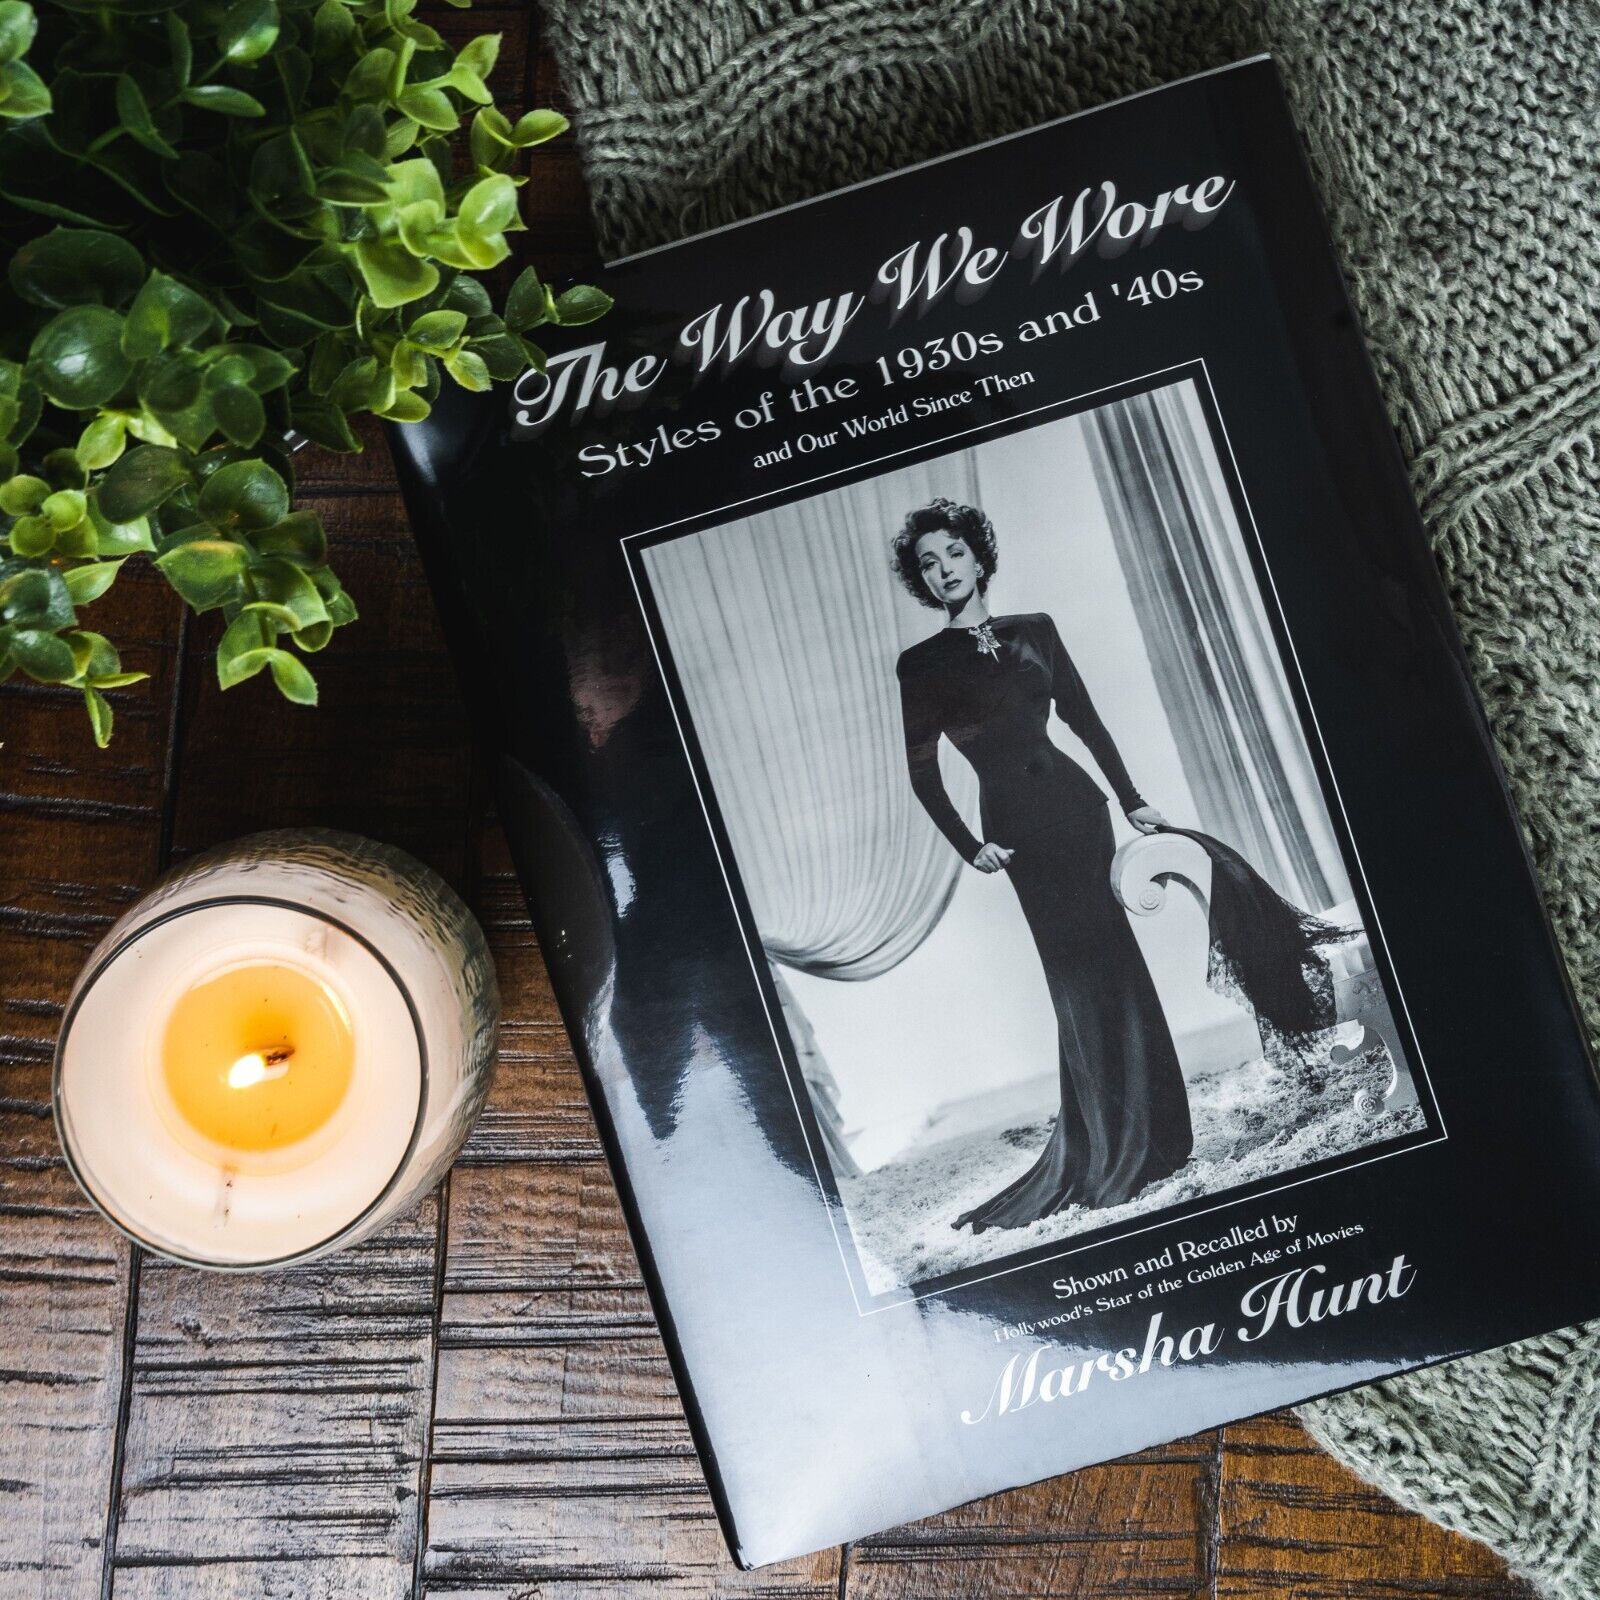 The Way We Wore : Styles of the 1930s and \'40s by Marsha Hunt (Hardcover)